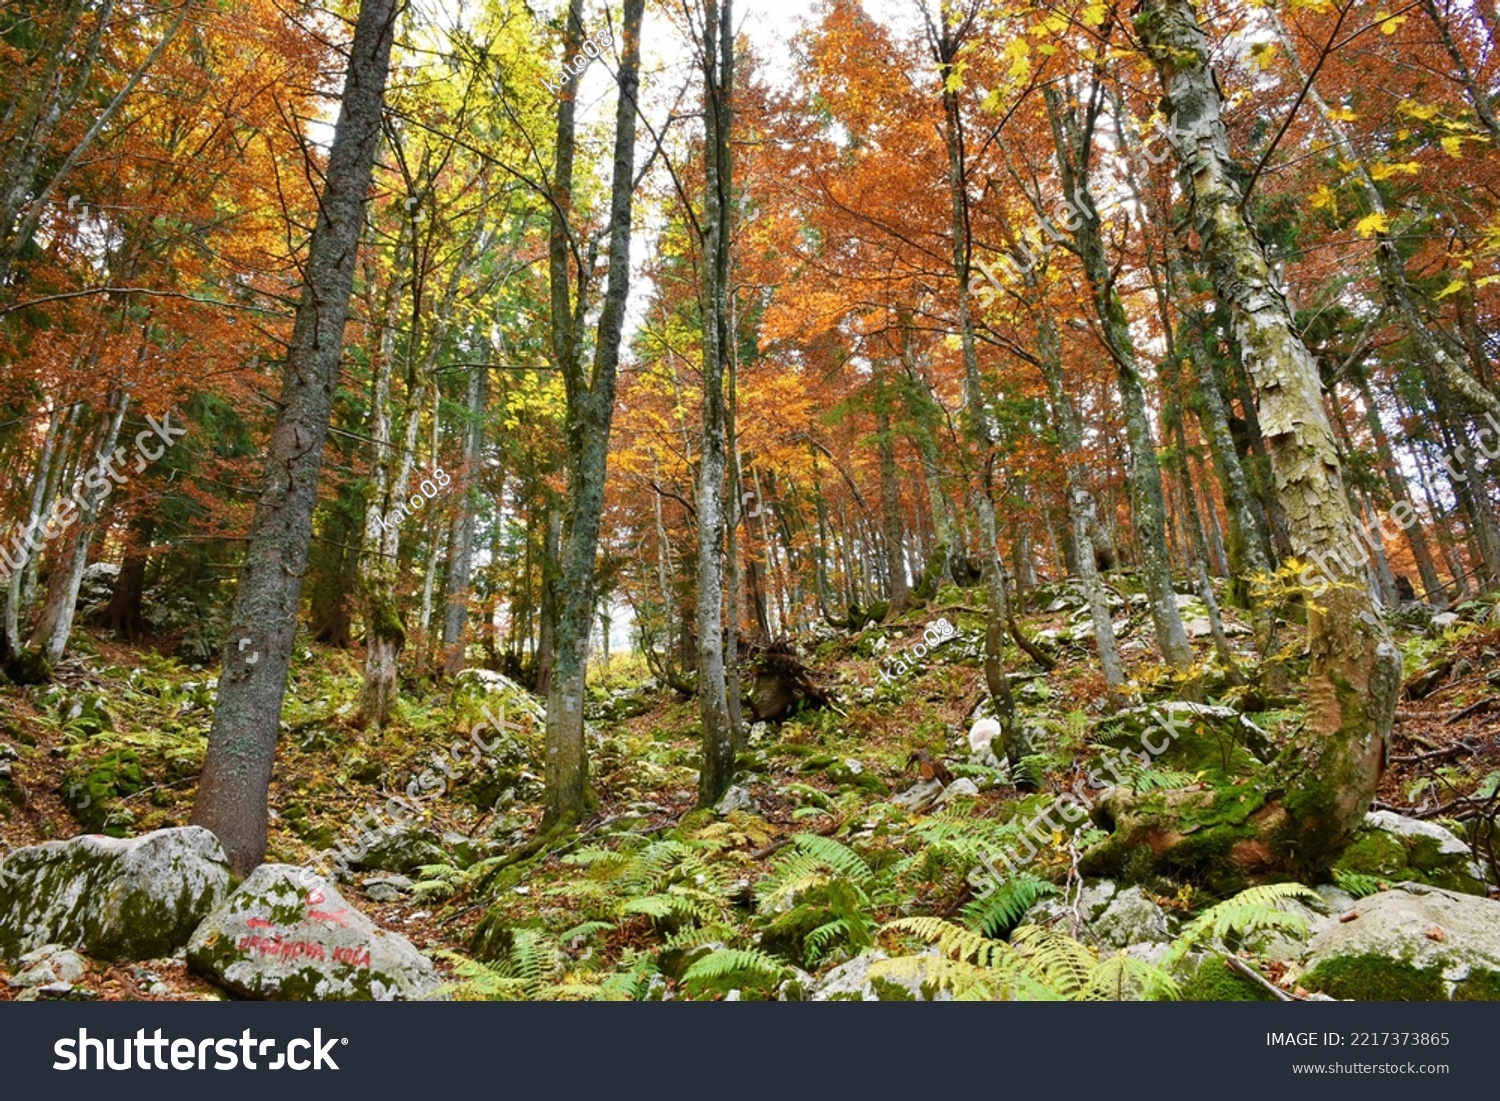 Colorful broadleaf, deciduous forest in yellow, orange and red autumn colores with beech and sycamore maple trees with ferns and rocks covering the ground #2217373865